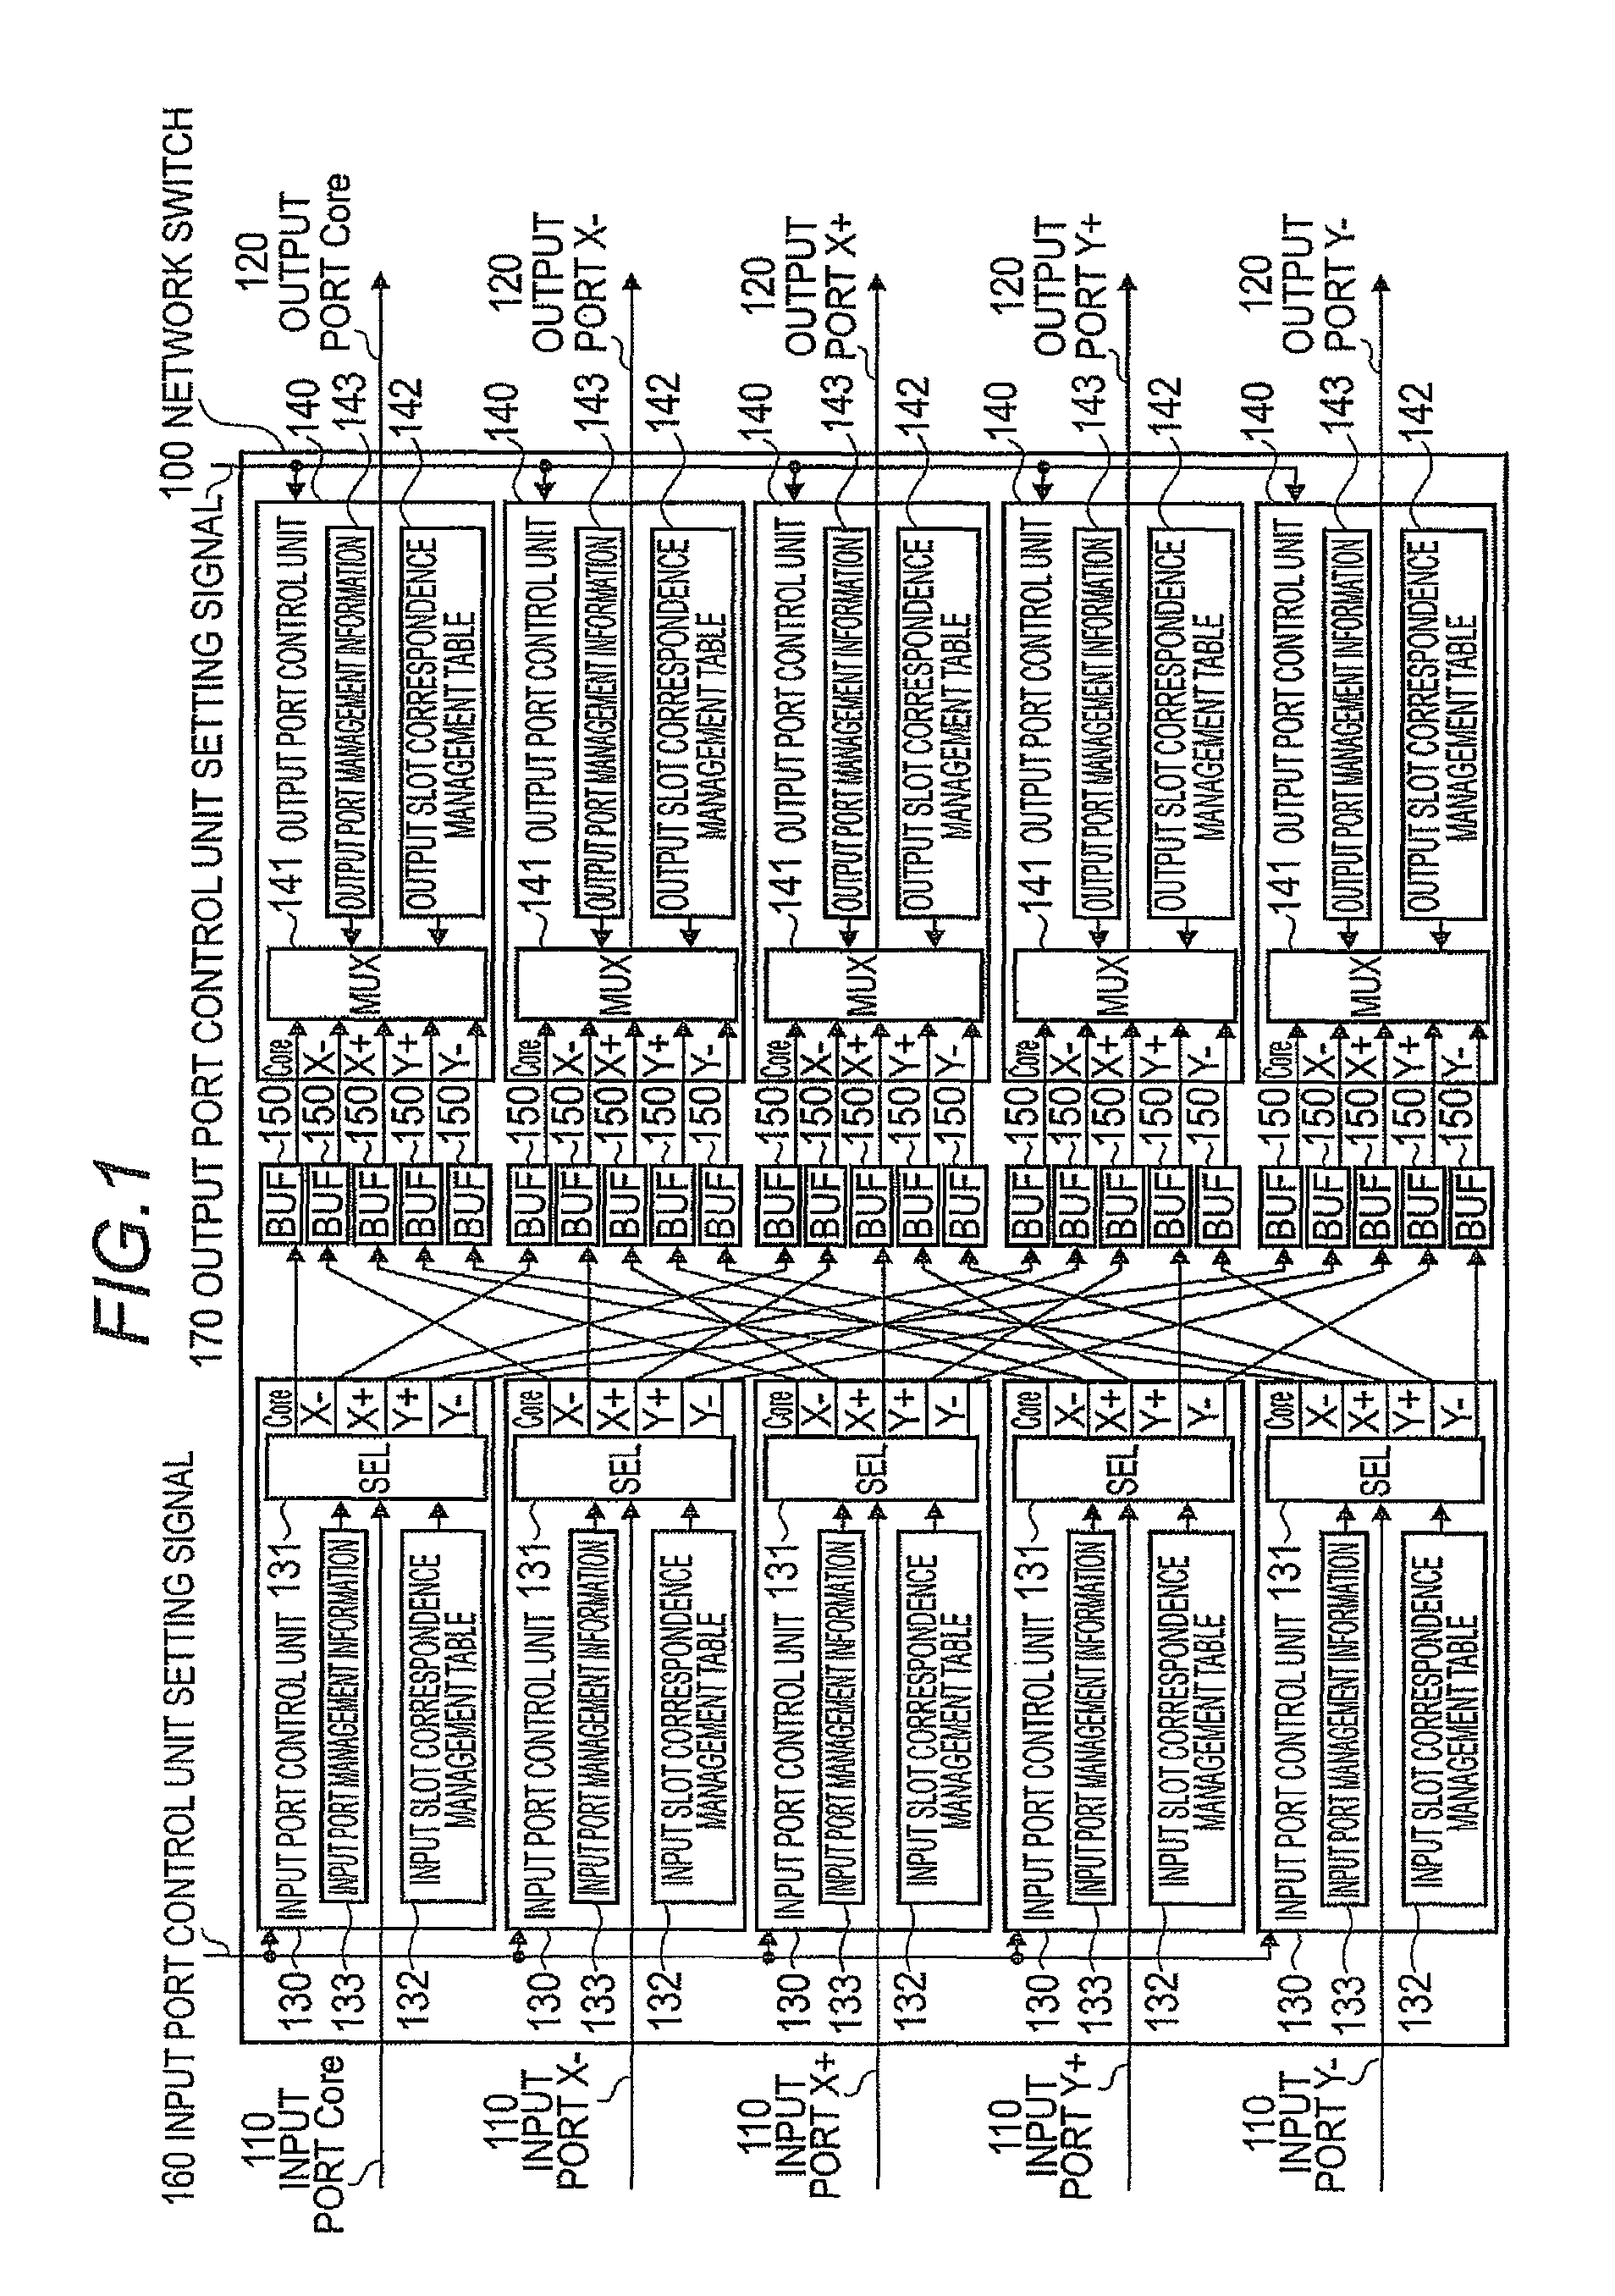 Interprocessor communication system and communication method, network switch, and parallel calculation system